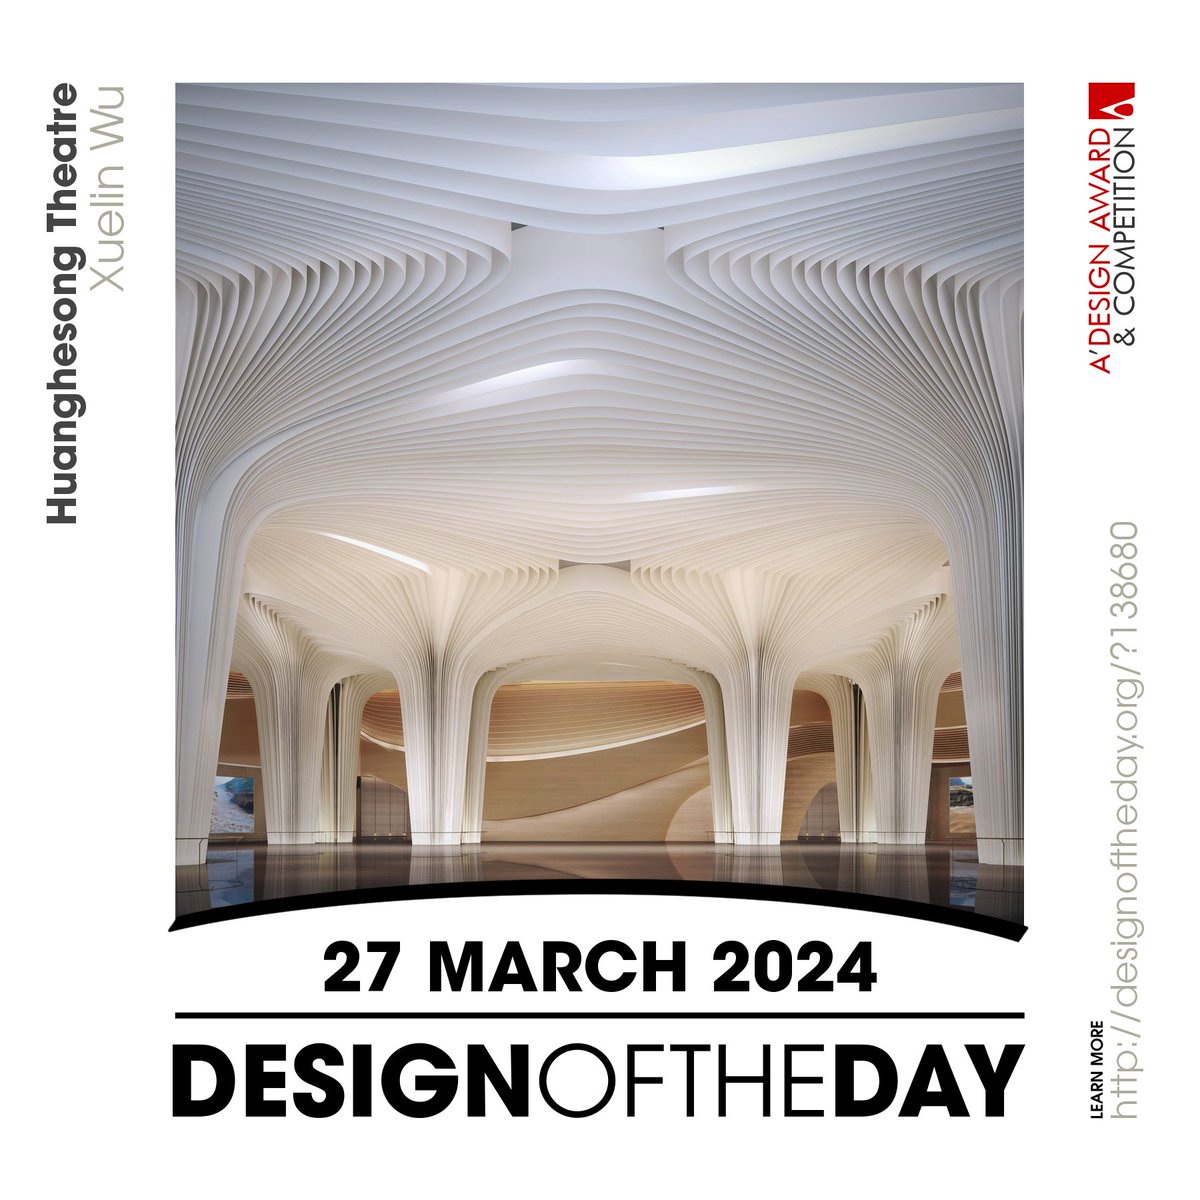 Congrats to Xuelin Wu, the creator behind the Design of the Day of 27 March 2024 - Huanghesong Theatre Cultural Venues. Check out this great work now. We are currently featuring it at designoftheday.org/?138680 #adesignaward #adesigncompetition #Interior #InteriorSpace